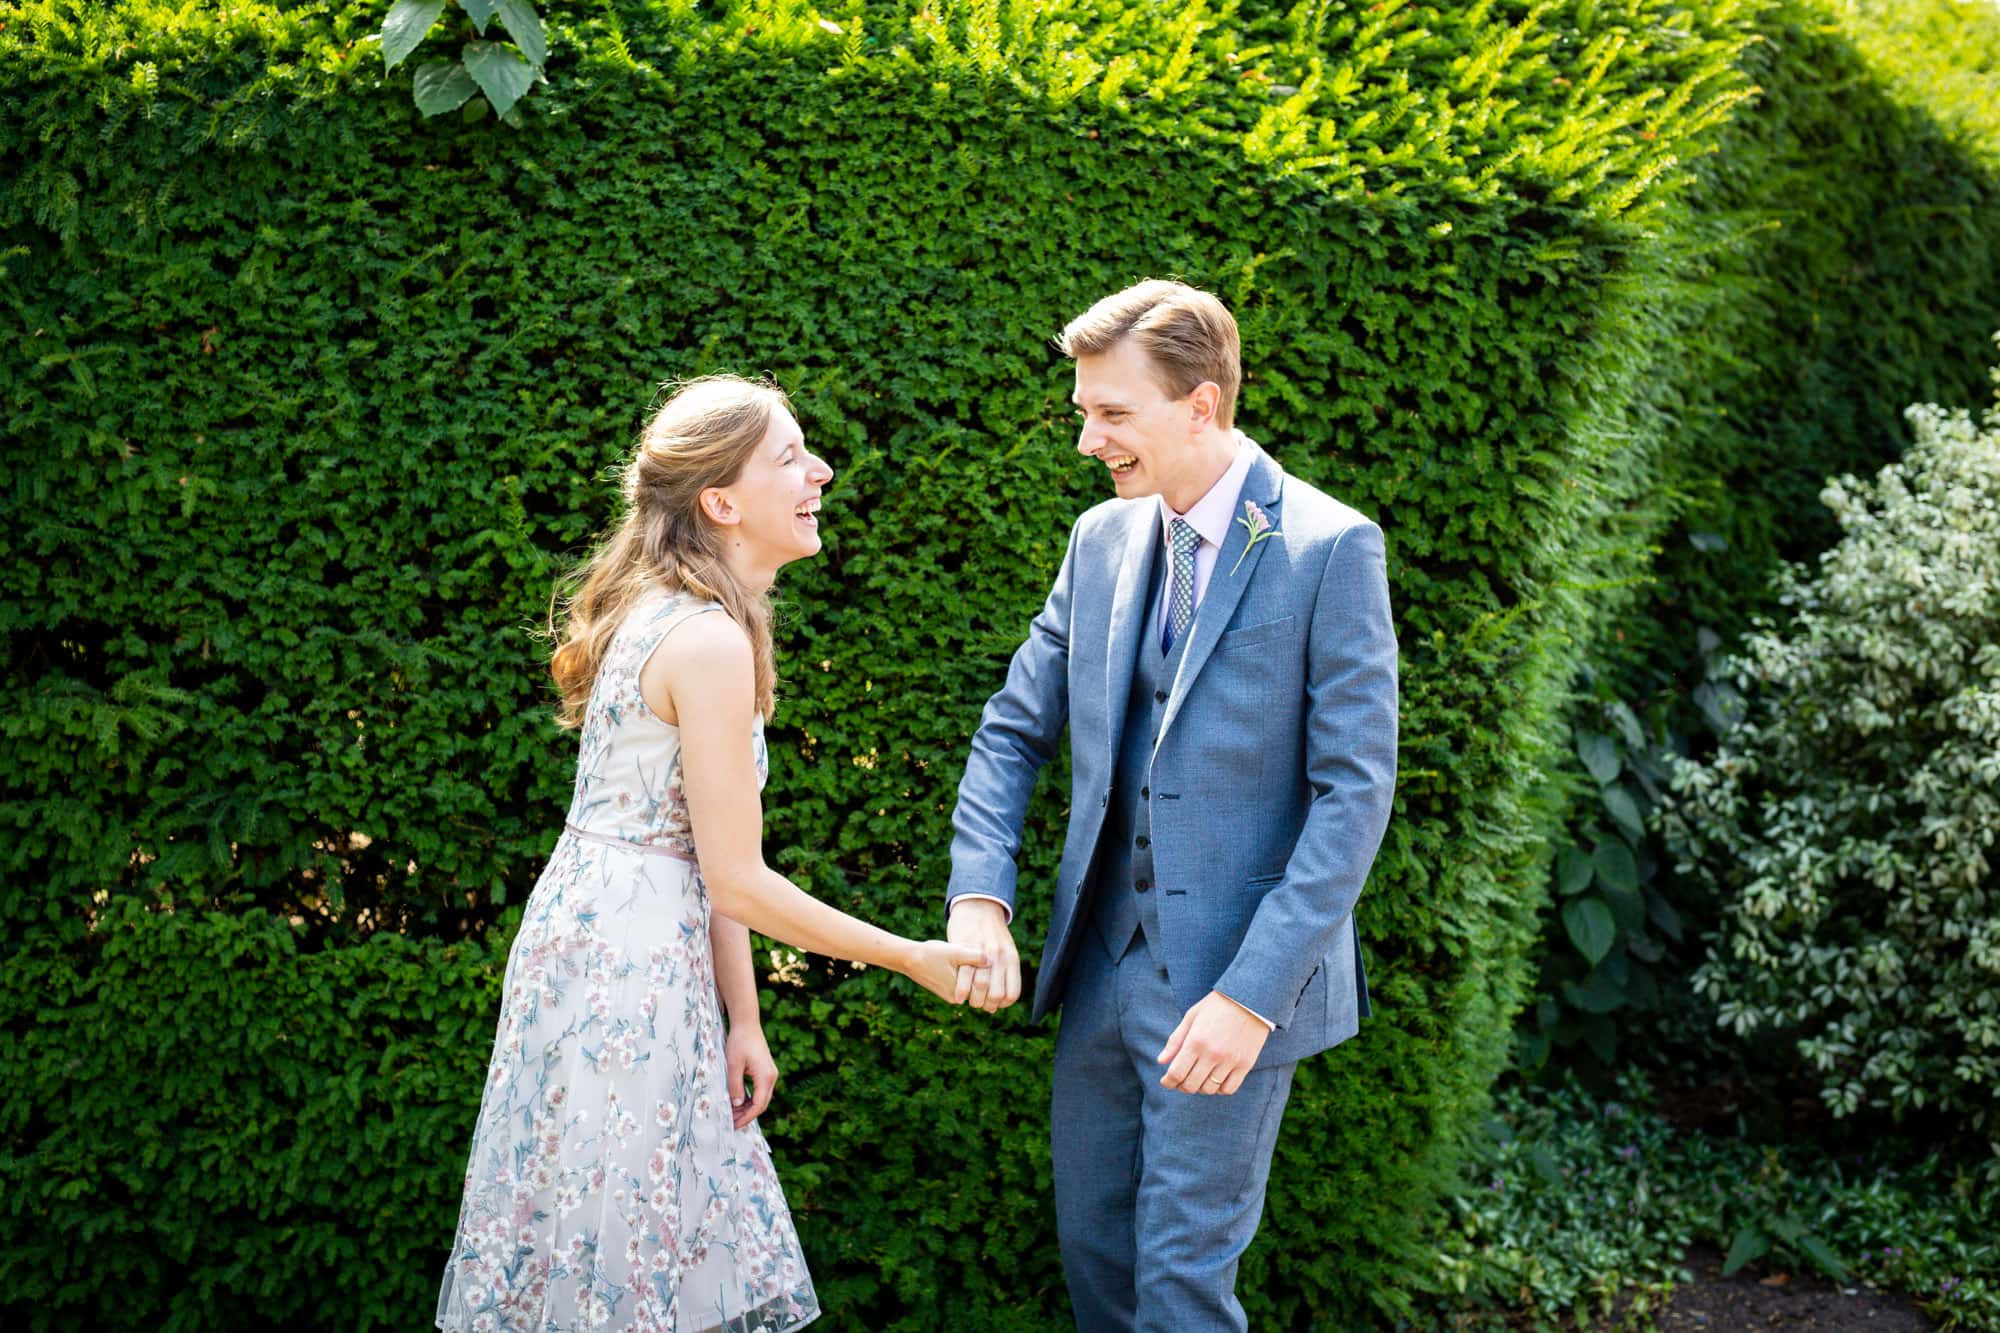 couple laughing surrounded by greenery in Bromley wedding photoshoot at Oaks Farm Weddings